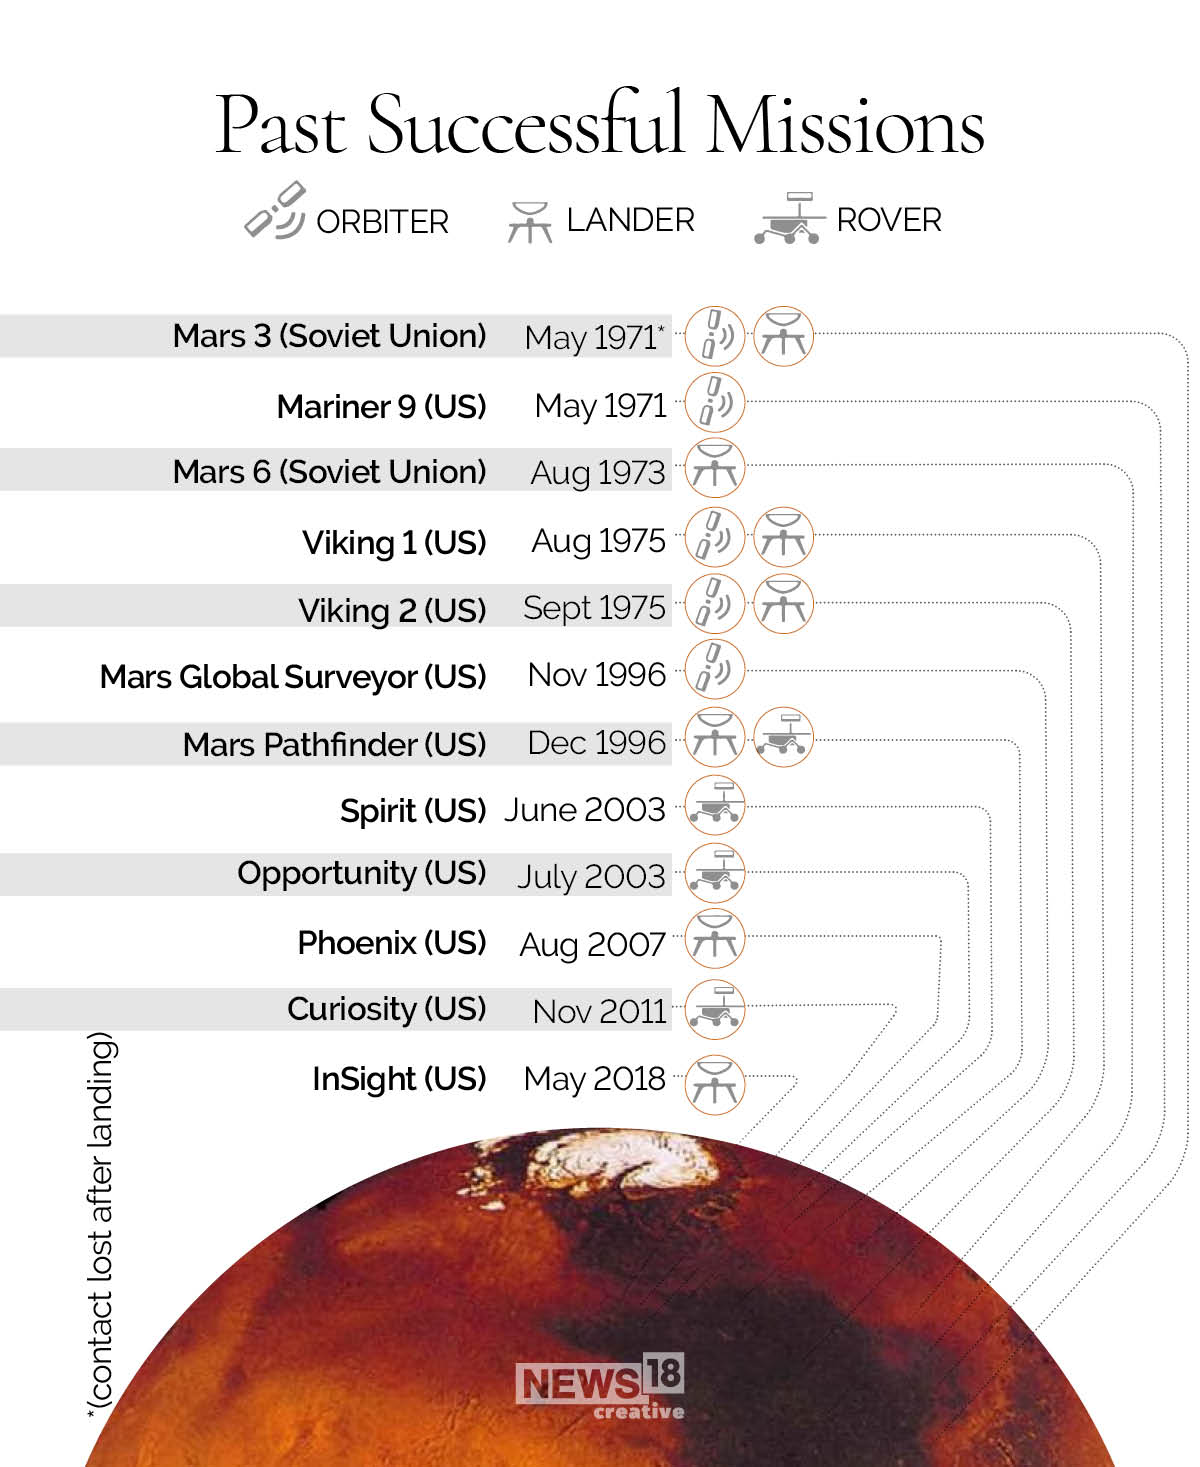 Missions to Mars: Past, present and future journeys